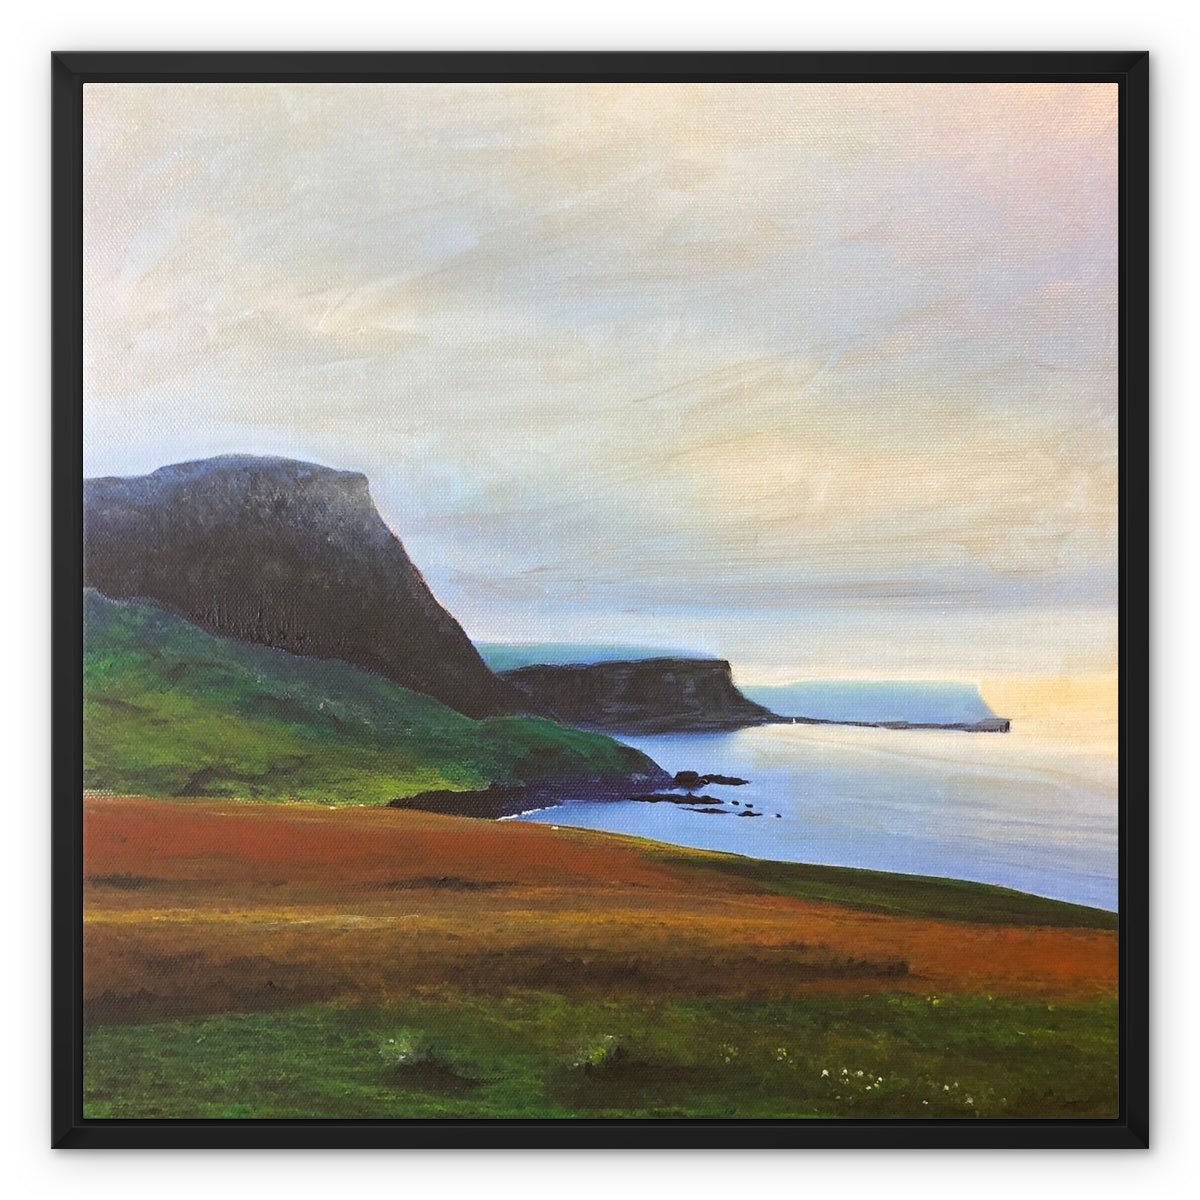 Neist Point Cliffs Skye Painting | Framed Canvas From Scotland-Floating Framed Canvas Prints-Skye Art Gallery-24"x24"-Black Frame-Paintings, Prints, Homeware, Art Gifts From Scotland By Scottish Artist Kevin Hunter